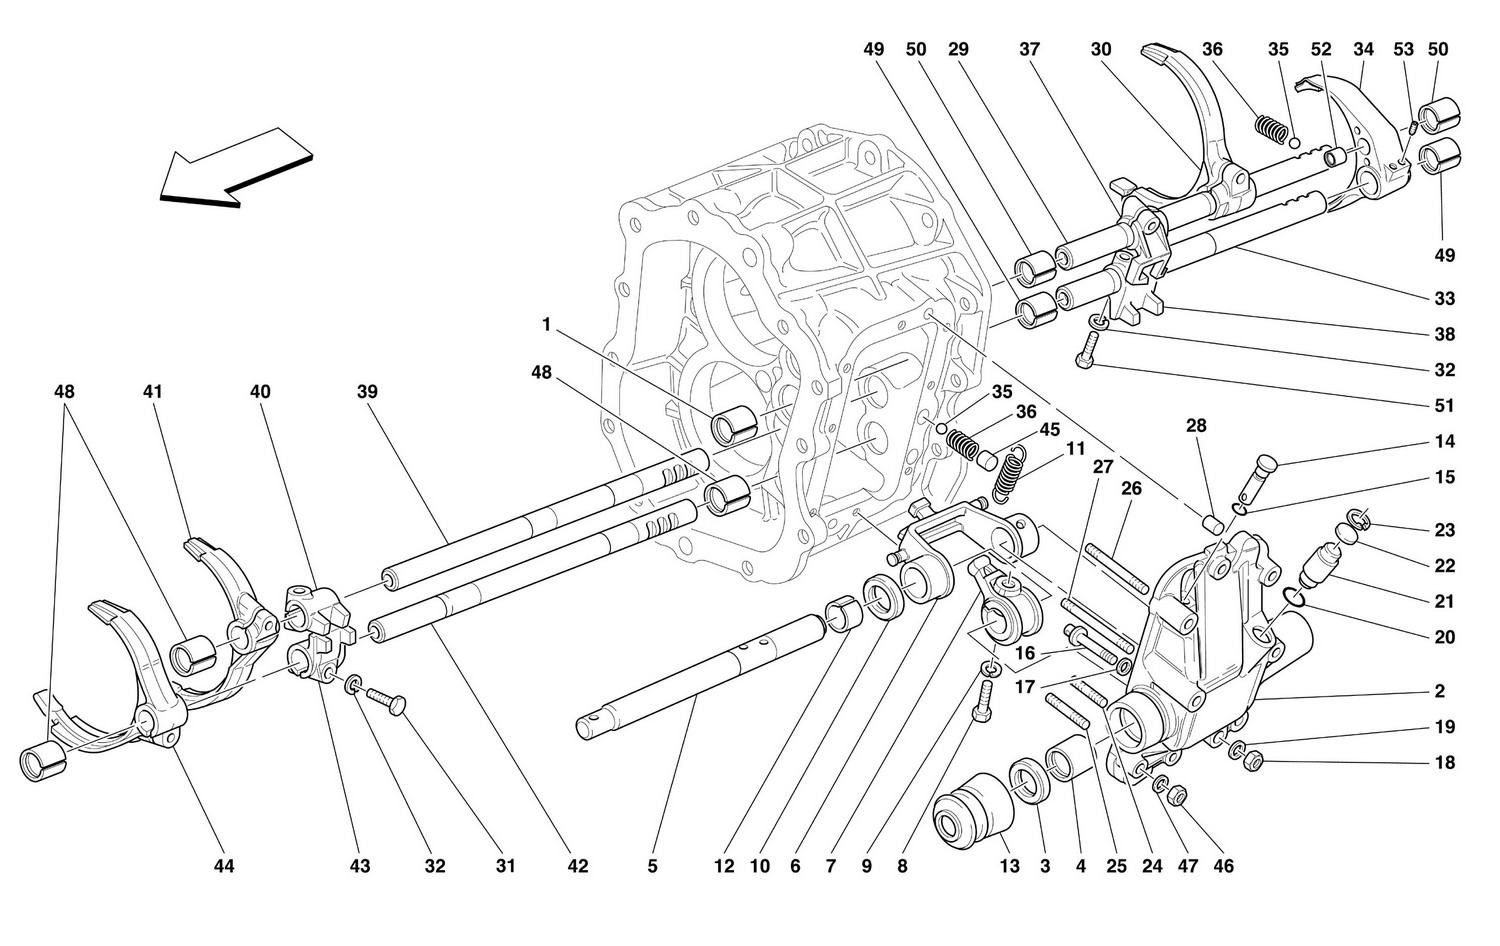 Schematic: Inside Gearbox Controls -Not For 456M Gta